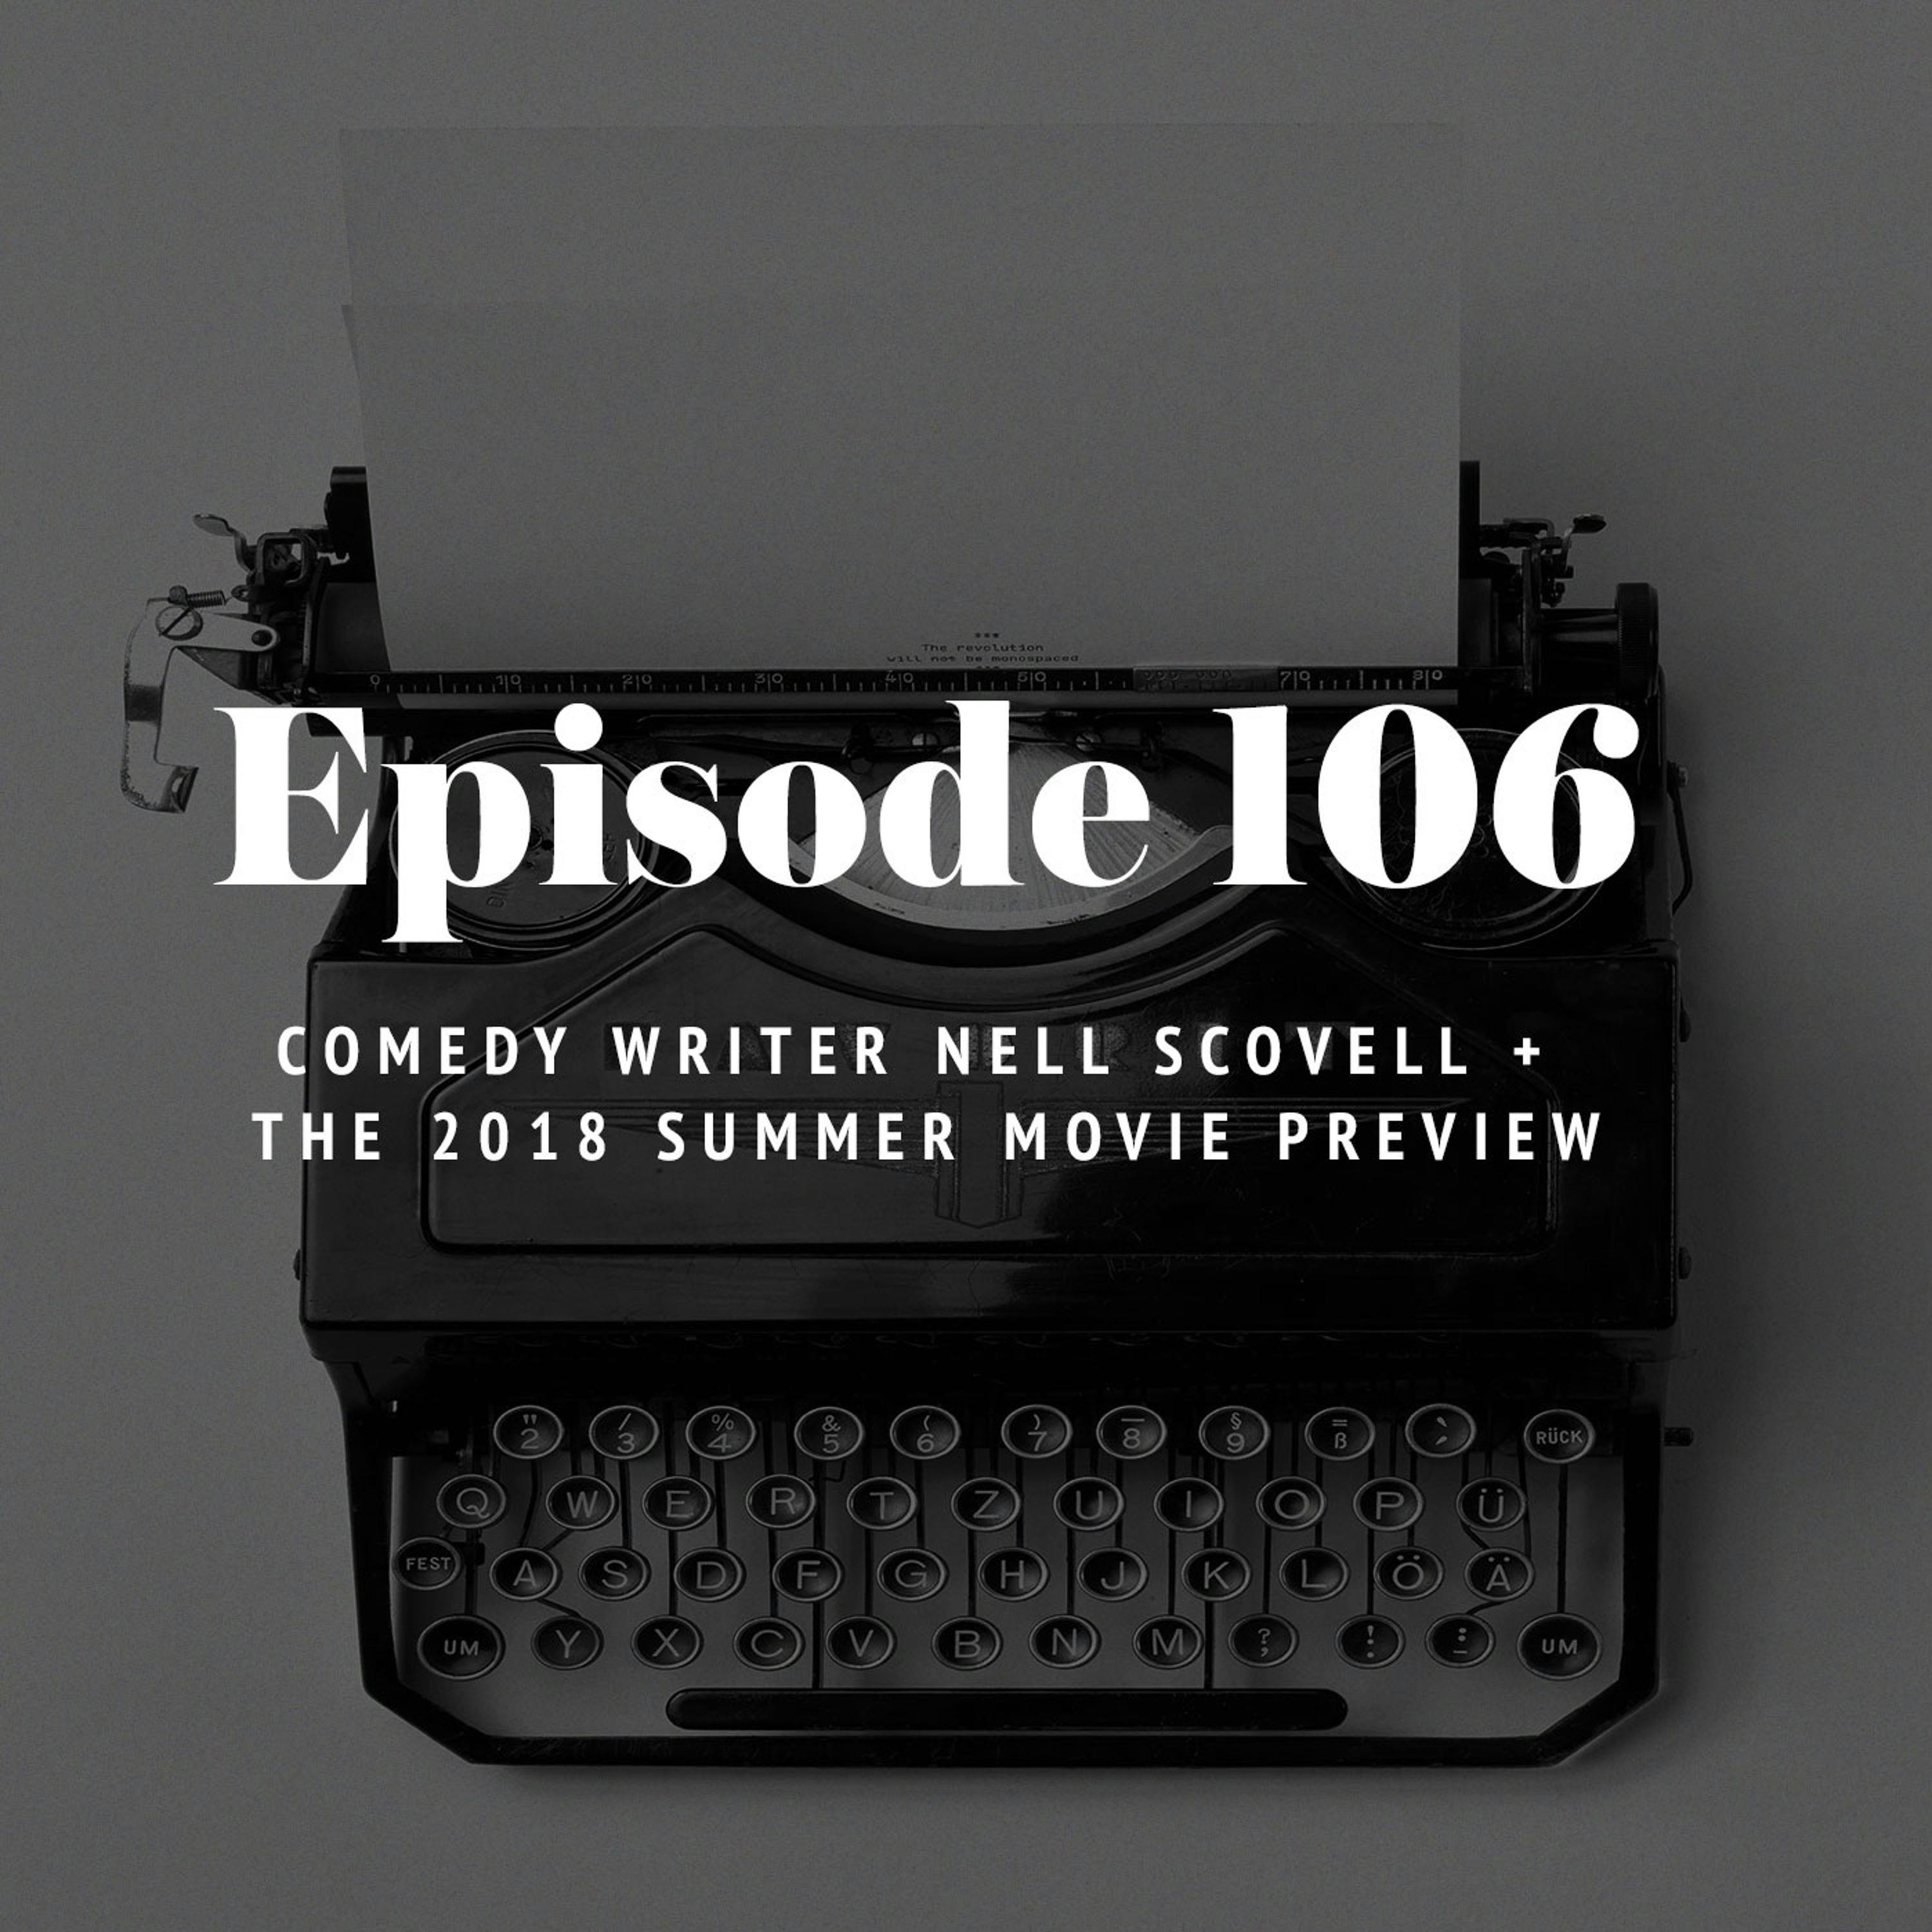 Episode 106: Comedy writer Nell Scovell + The 2018 Summer Movie Preview